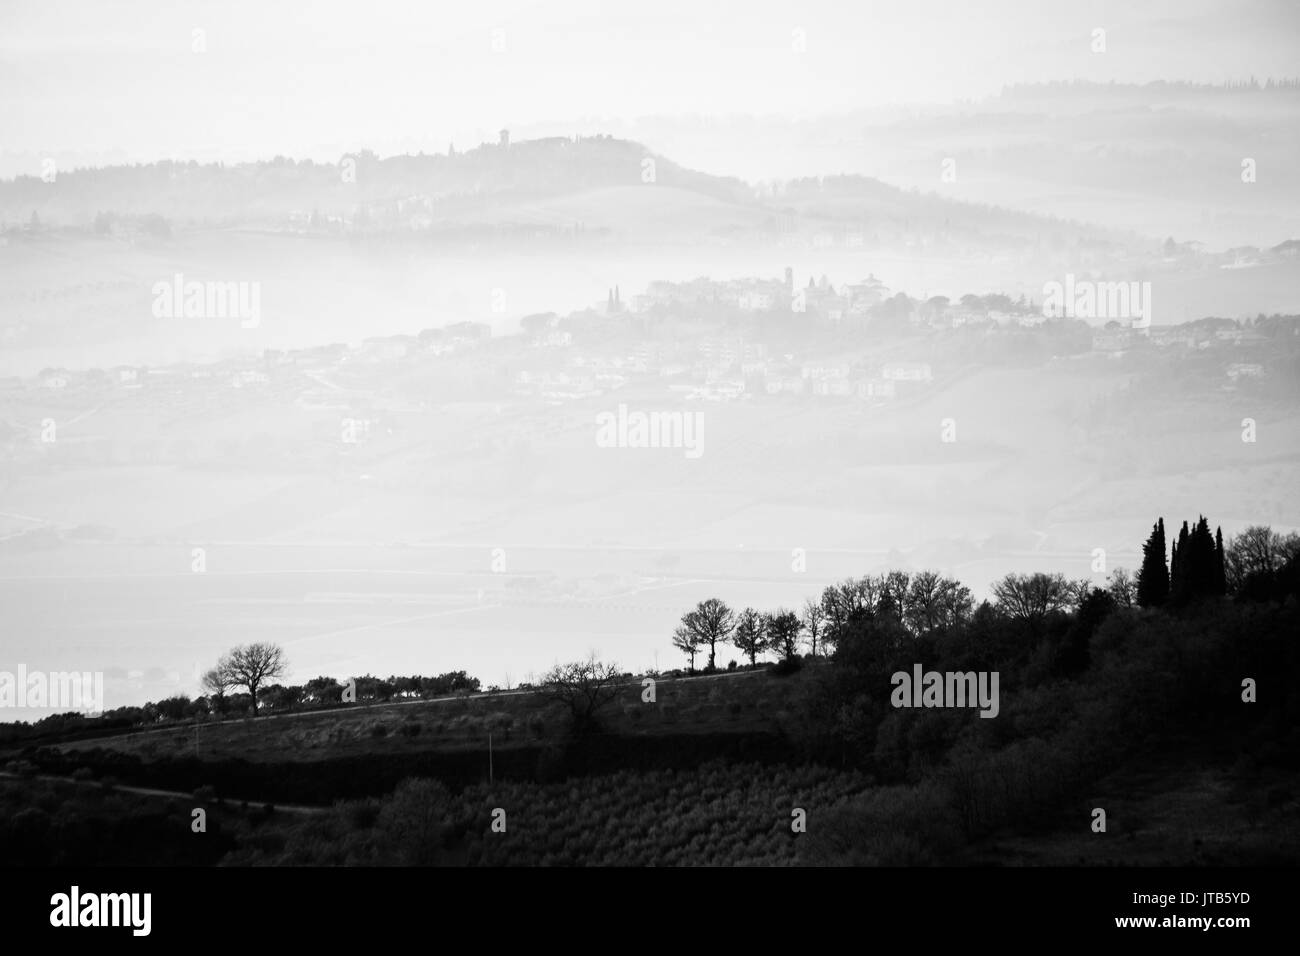 A view of some trees in the foreground with layers of hills and towns through the mist in the background Stock Photo